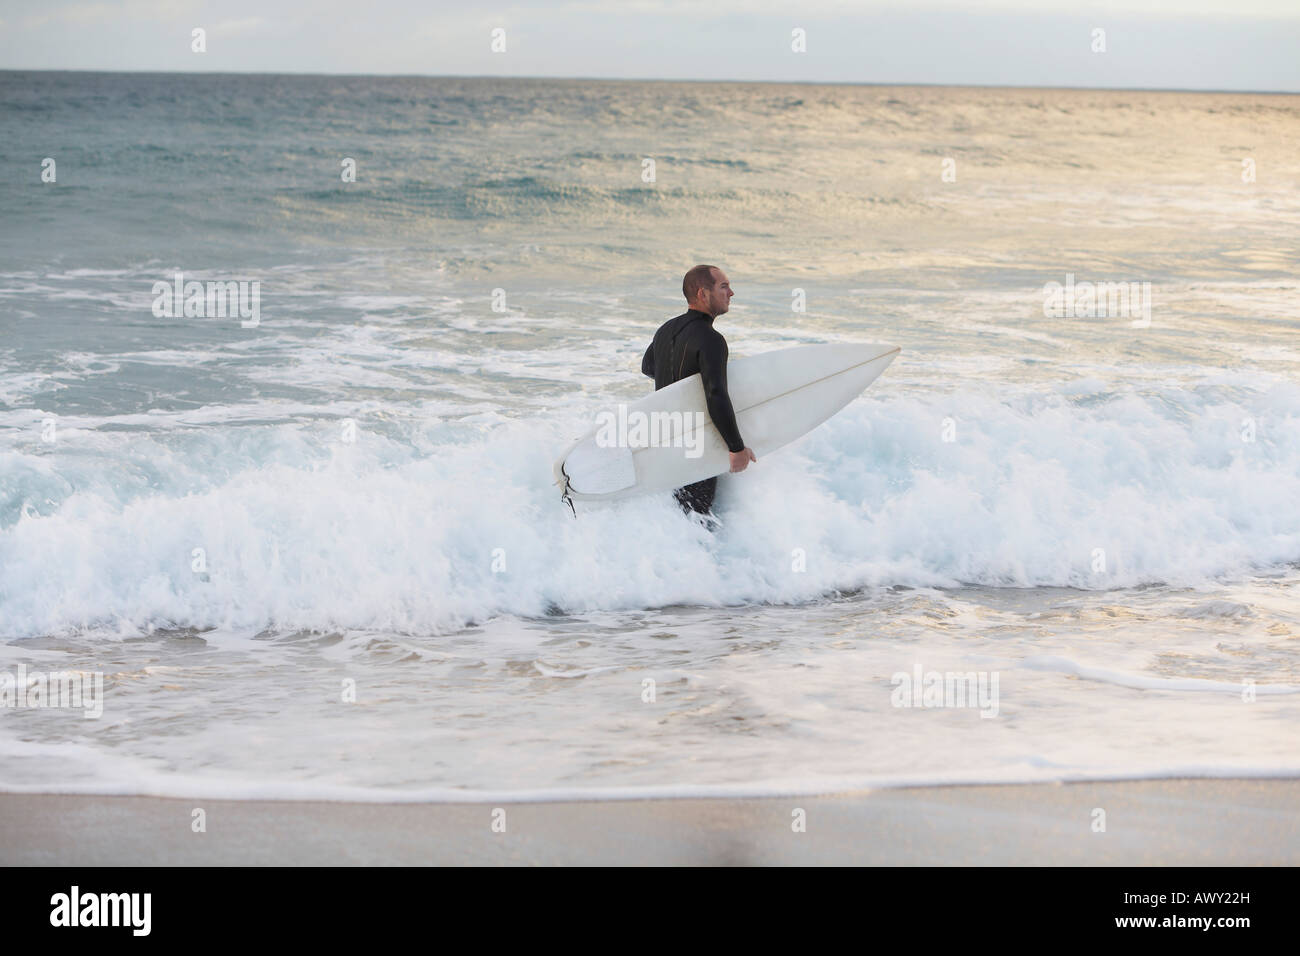 Surfer carrying surfboard in sea, side view Stock Photo